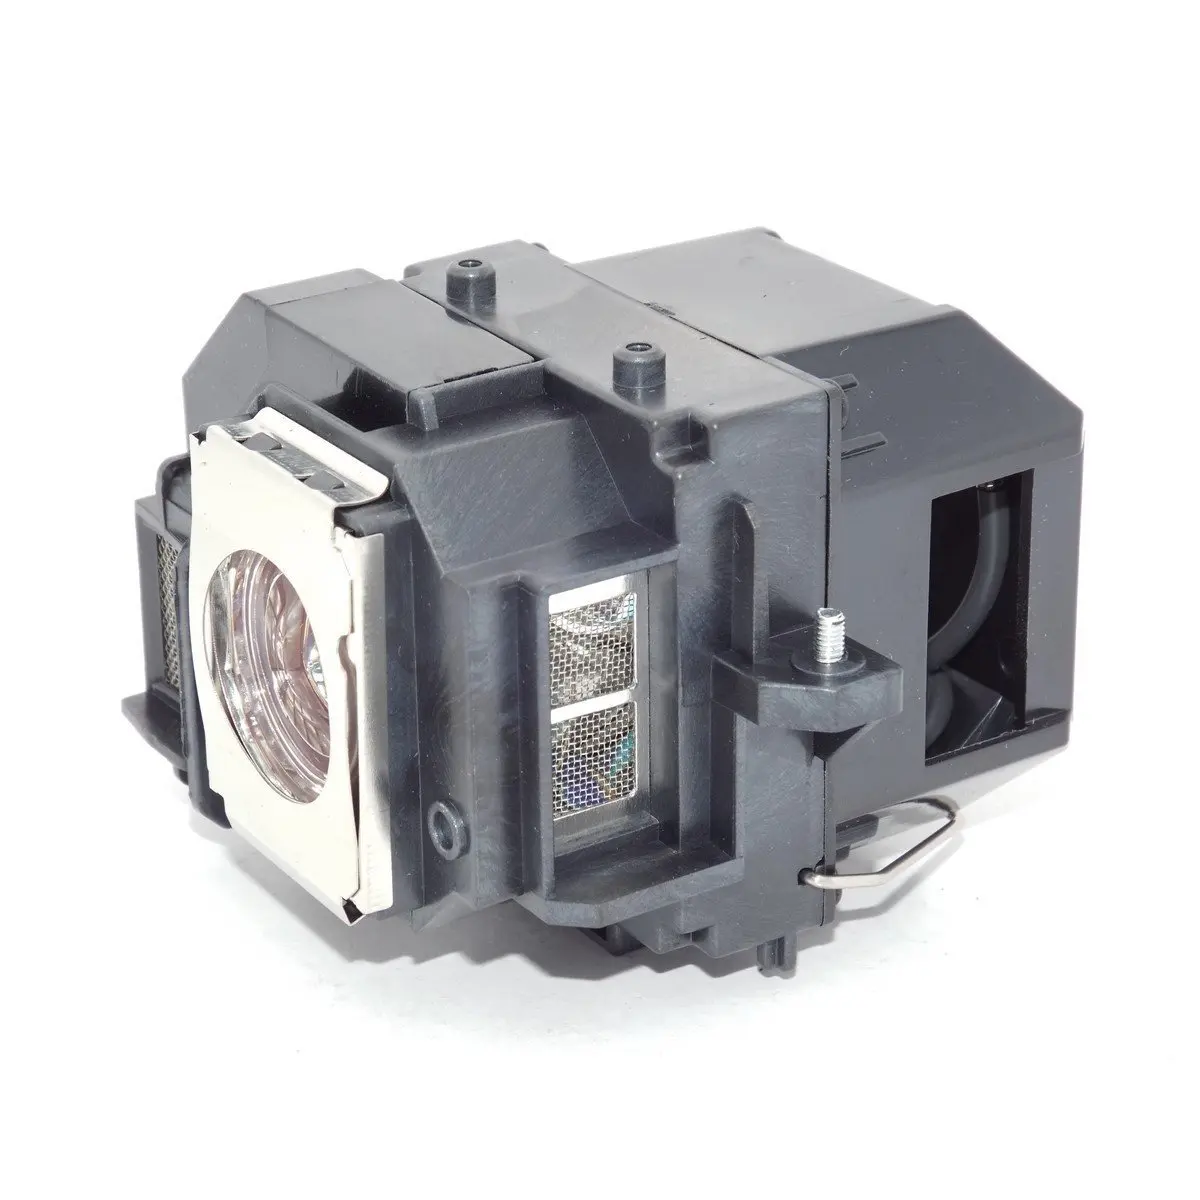 JTL Projector Lamp for Epson ELPLP54 PowerLite Home Cinema 705HD EX31 EX51 EX71 EB-S7 EB-X7 EB-S8 EB-X8 EB-S82 EB-W7 EB-W8 Replacement Projector Lamp with Housing